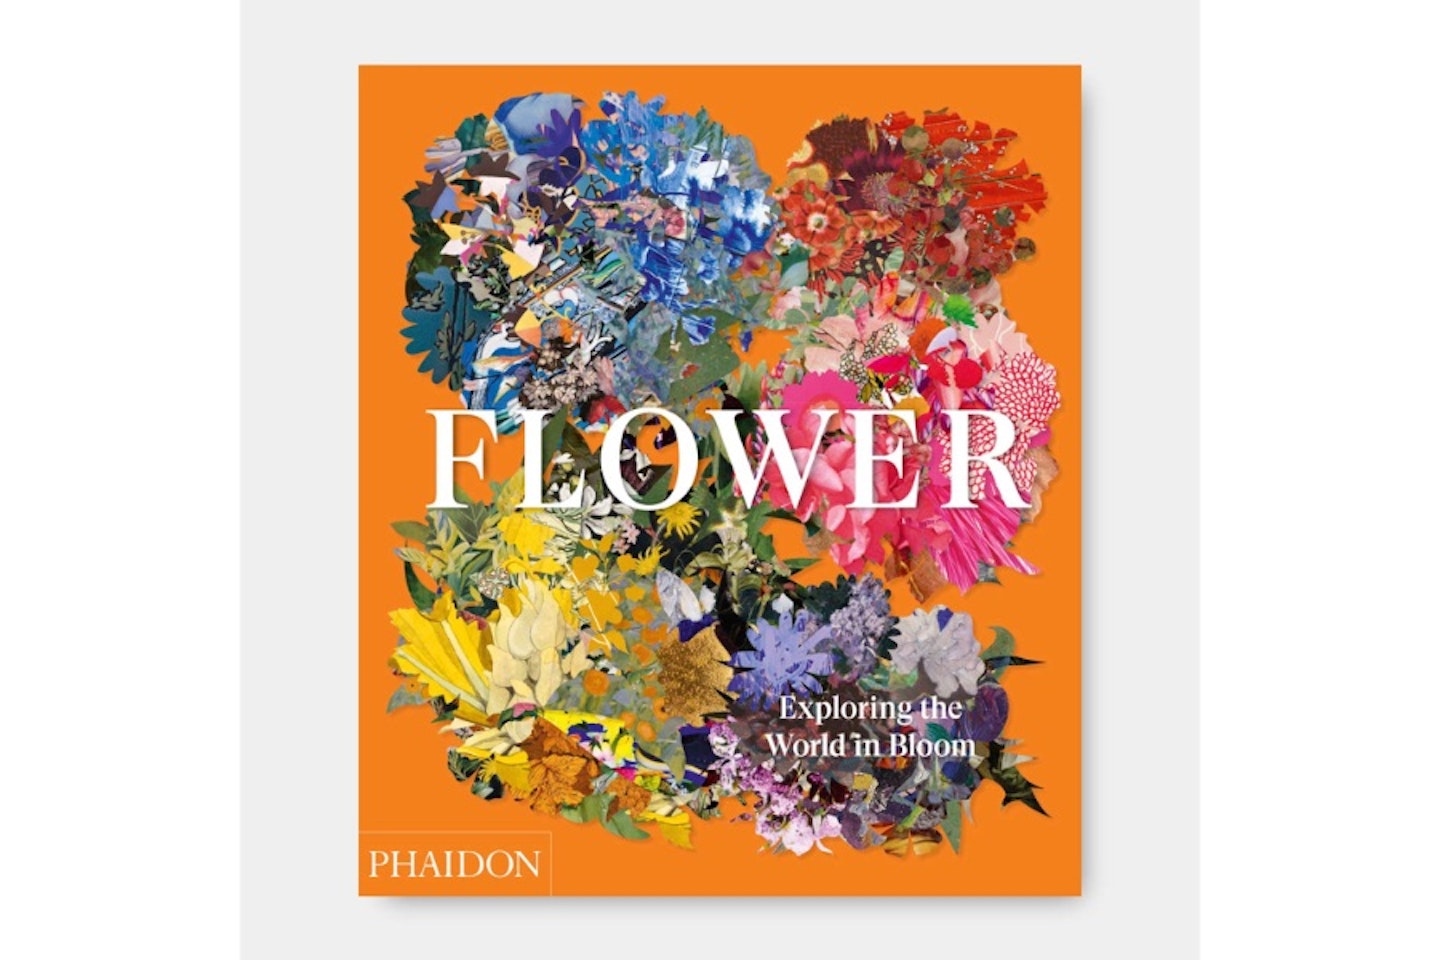 Flower: Exploring the World in Bloom Hardcover